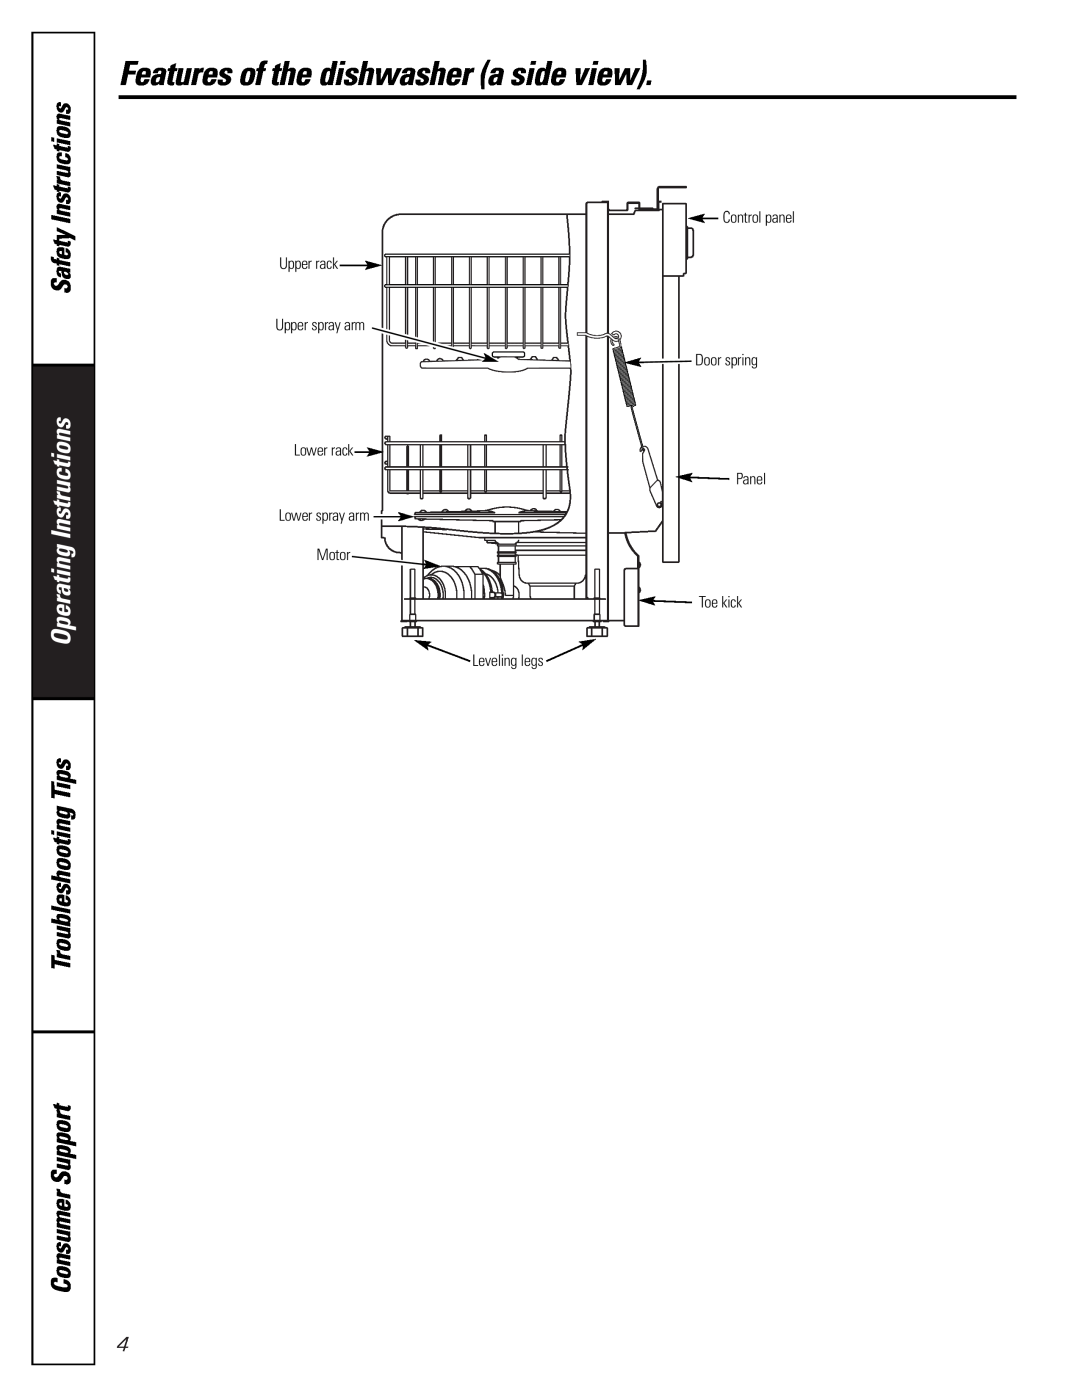 GE GSM1800 Features of the dishwasher a side view, Safety Instructions, Operating Instructions, Upper rack, Door spring 